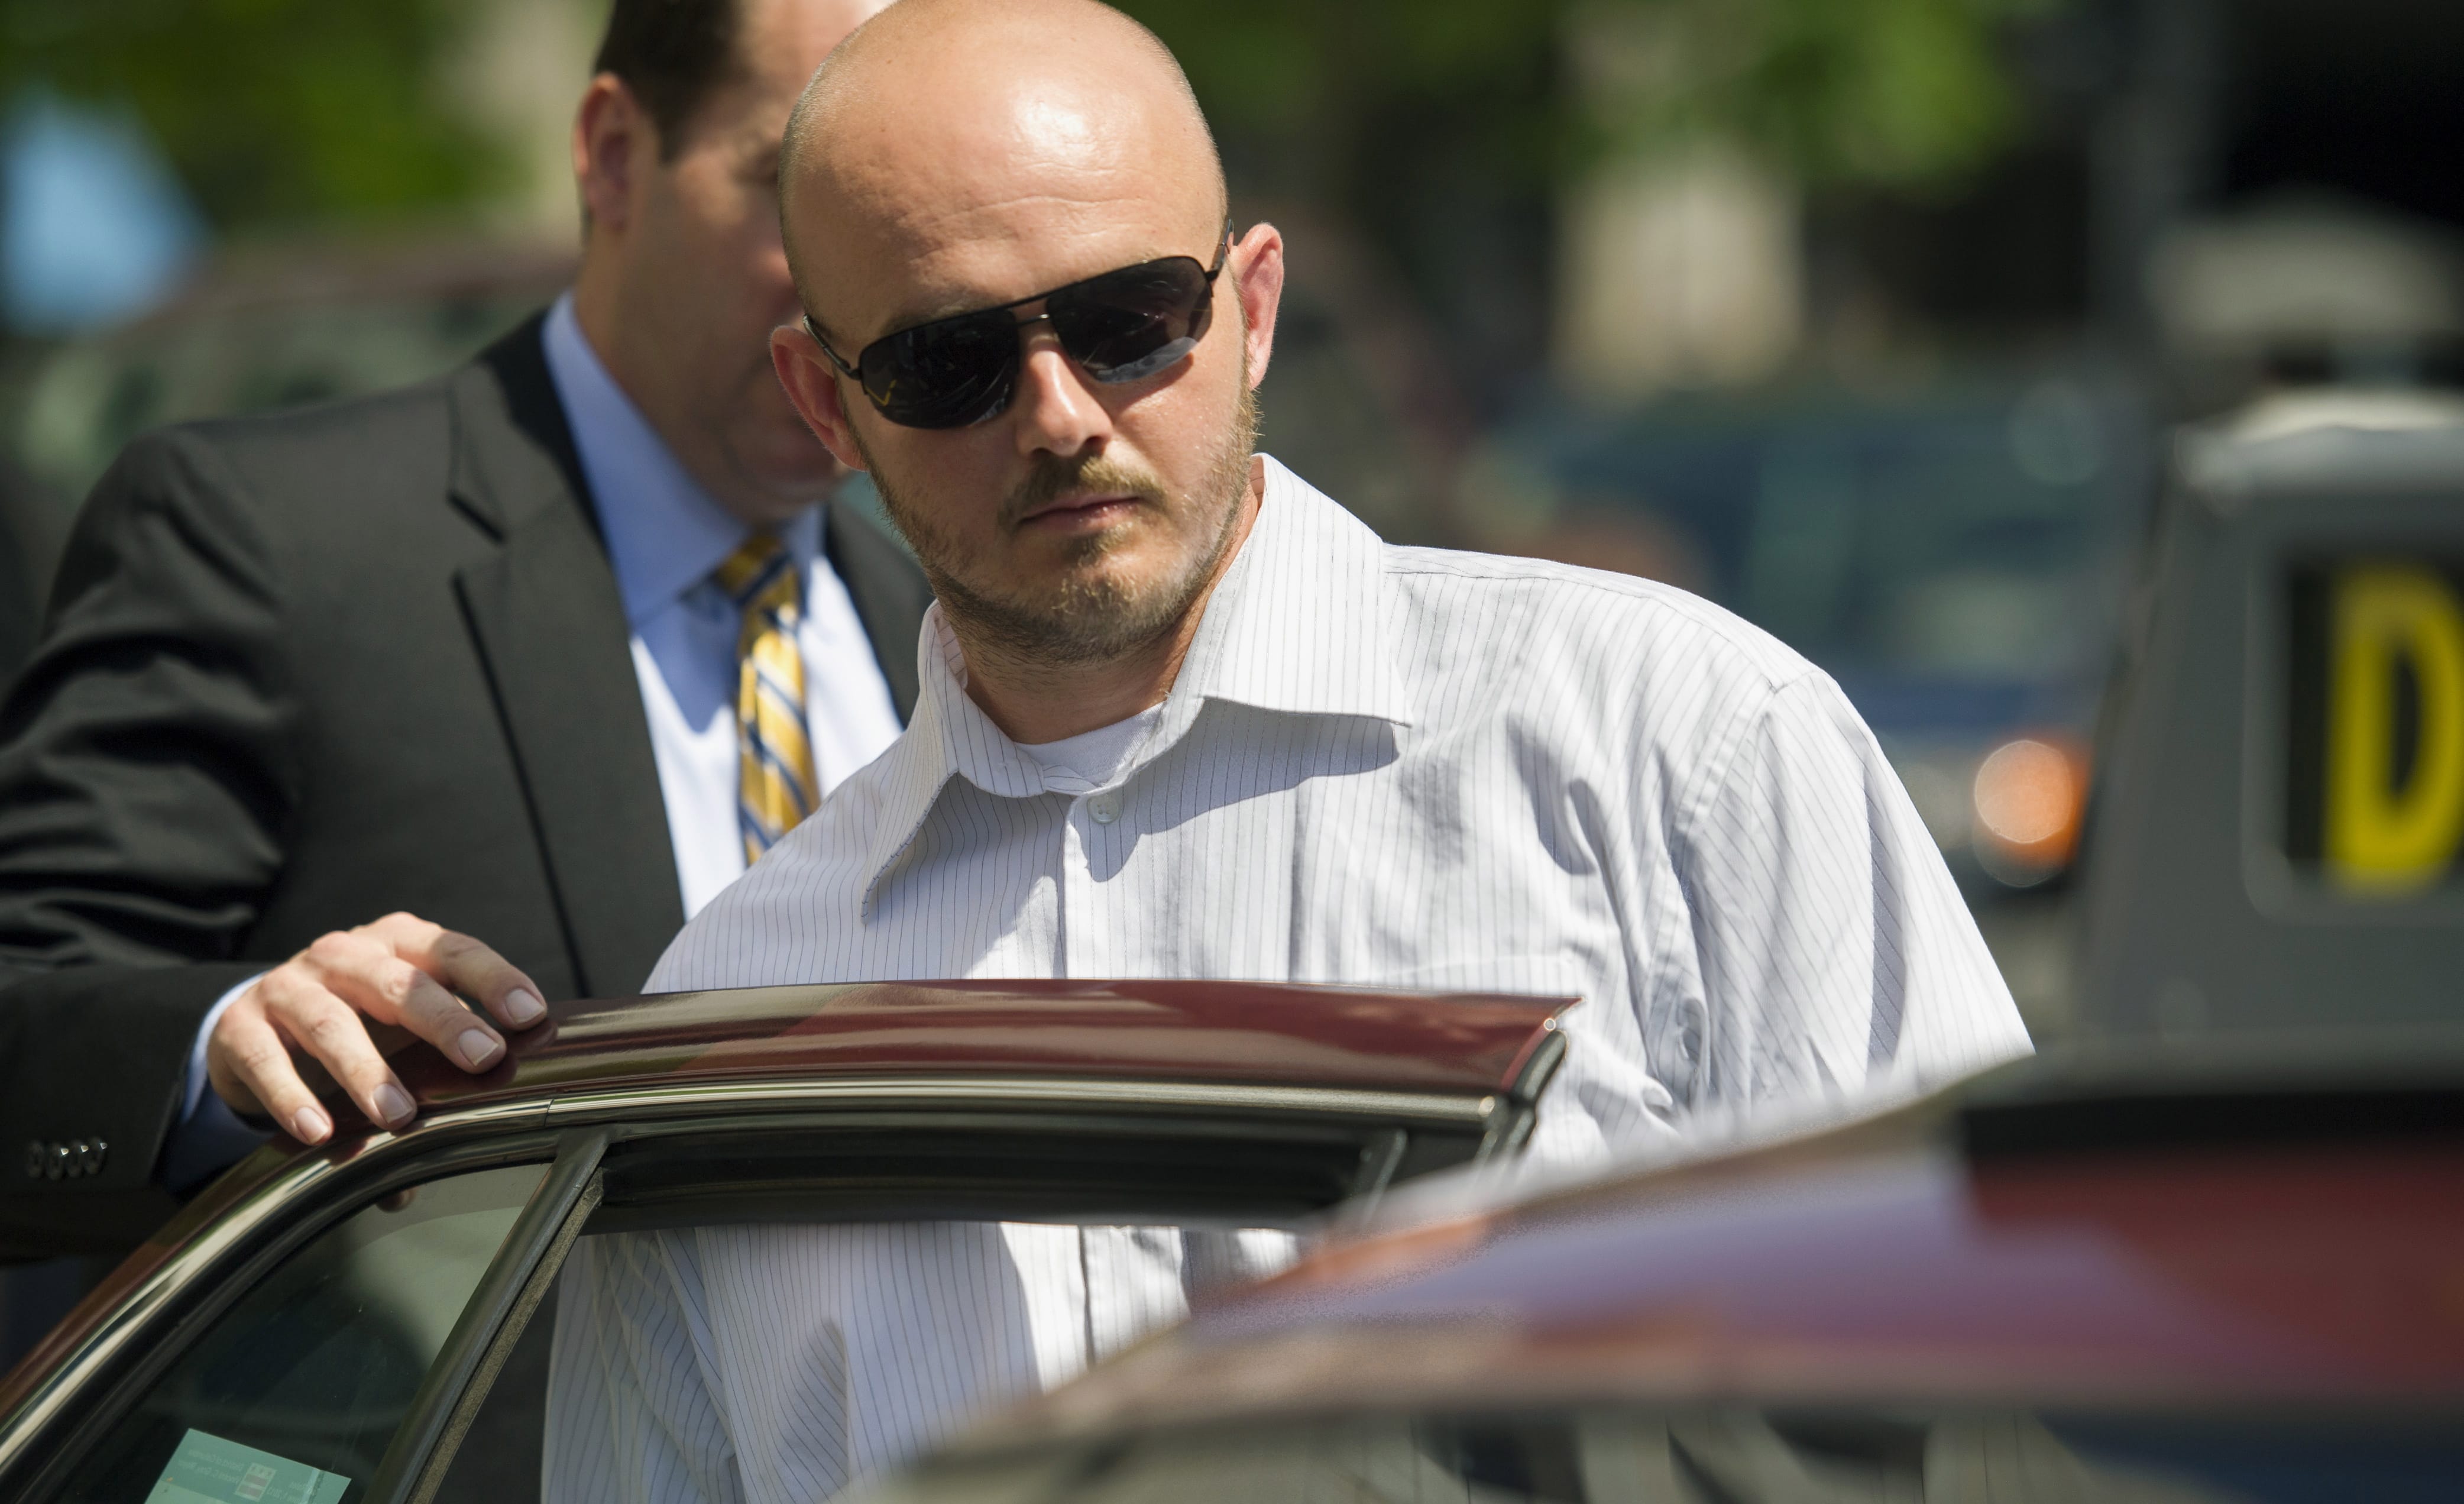 Former Blackwater Worldwide guard Nicholas Slatten enters a taxi cab as he leaves federal court in Washington, after the start of his trial.